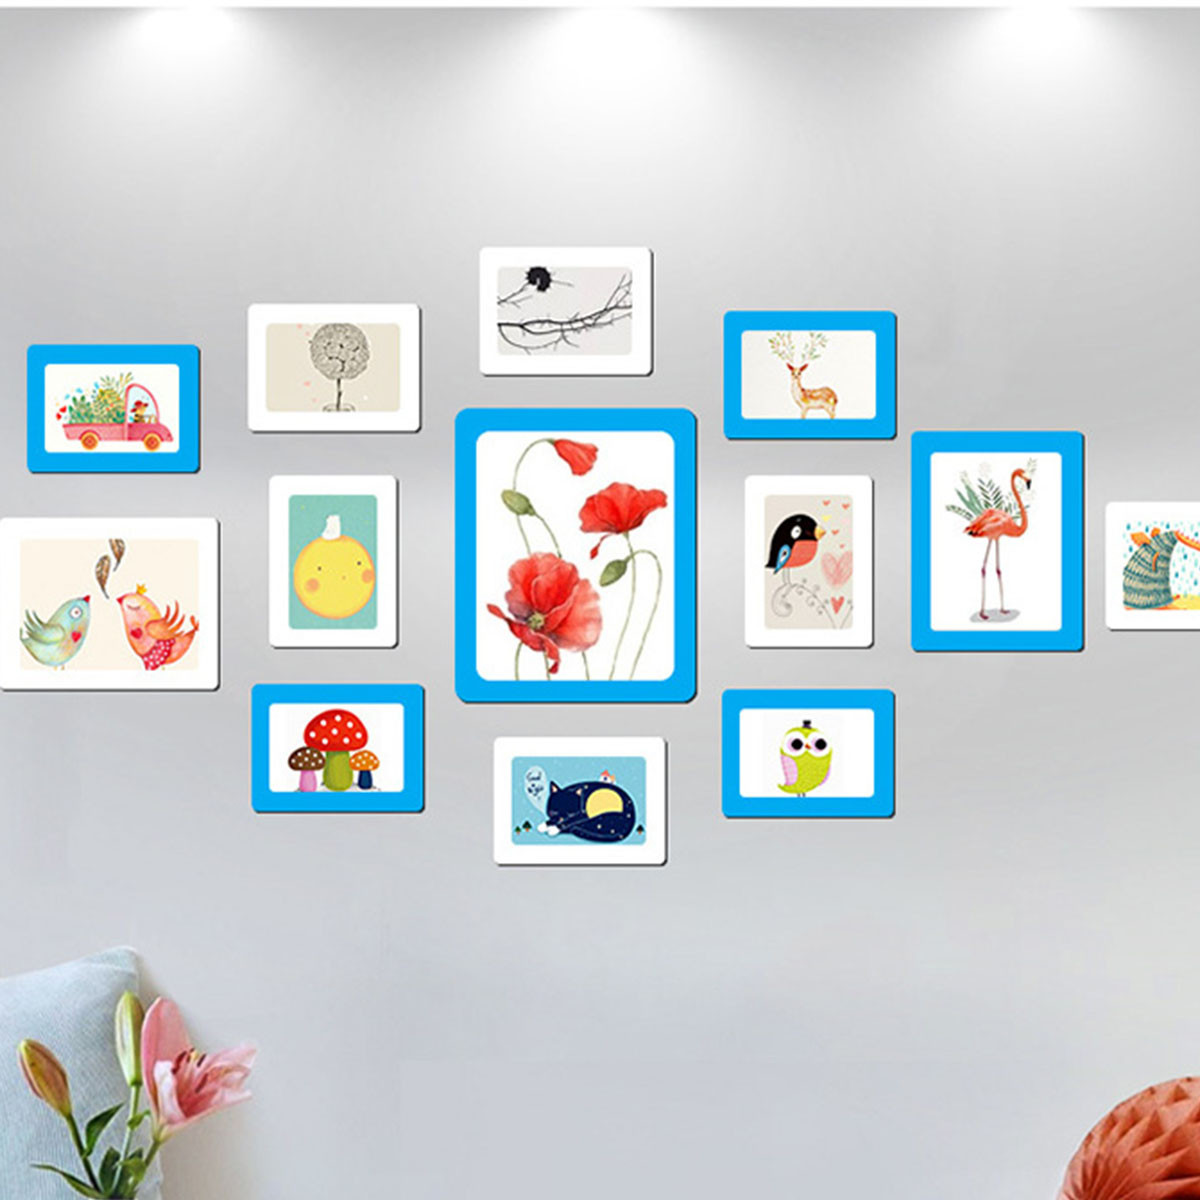 DIY-Colorful-Magnetic-Photo-Picture-Frames-Fridge-Refrigerator-Magnet-Photo-Frame-For-Wall-Living-Ro-1787813-1